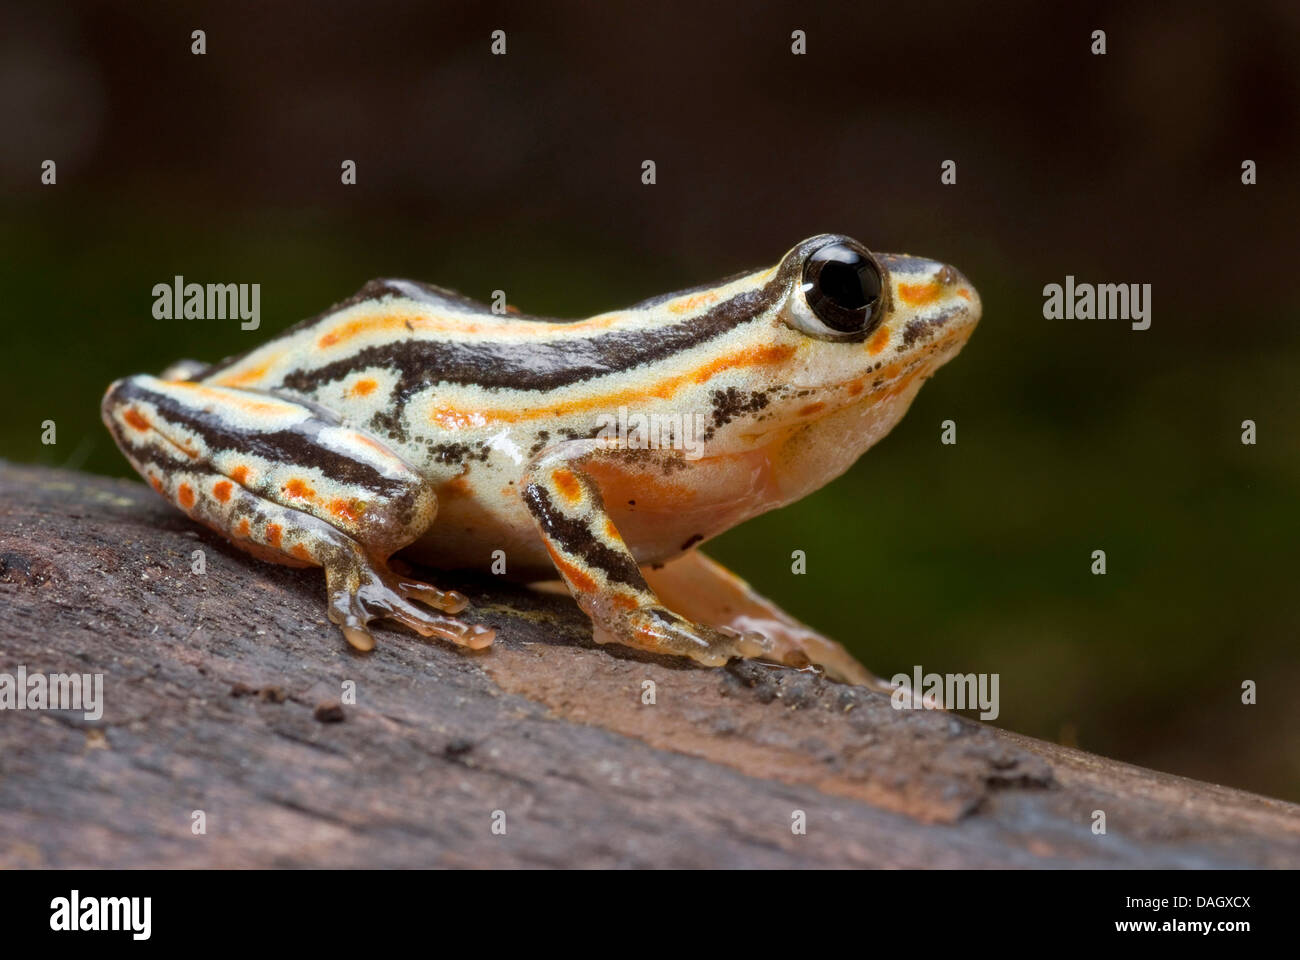 Marbled Reed Frog, Painted Reed Frog (Hyperolius marmoratus), on bark Stock Photo